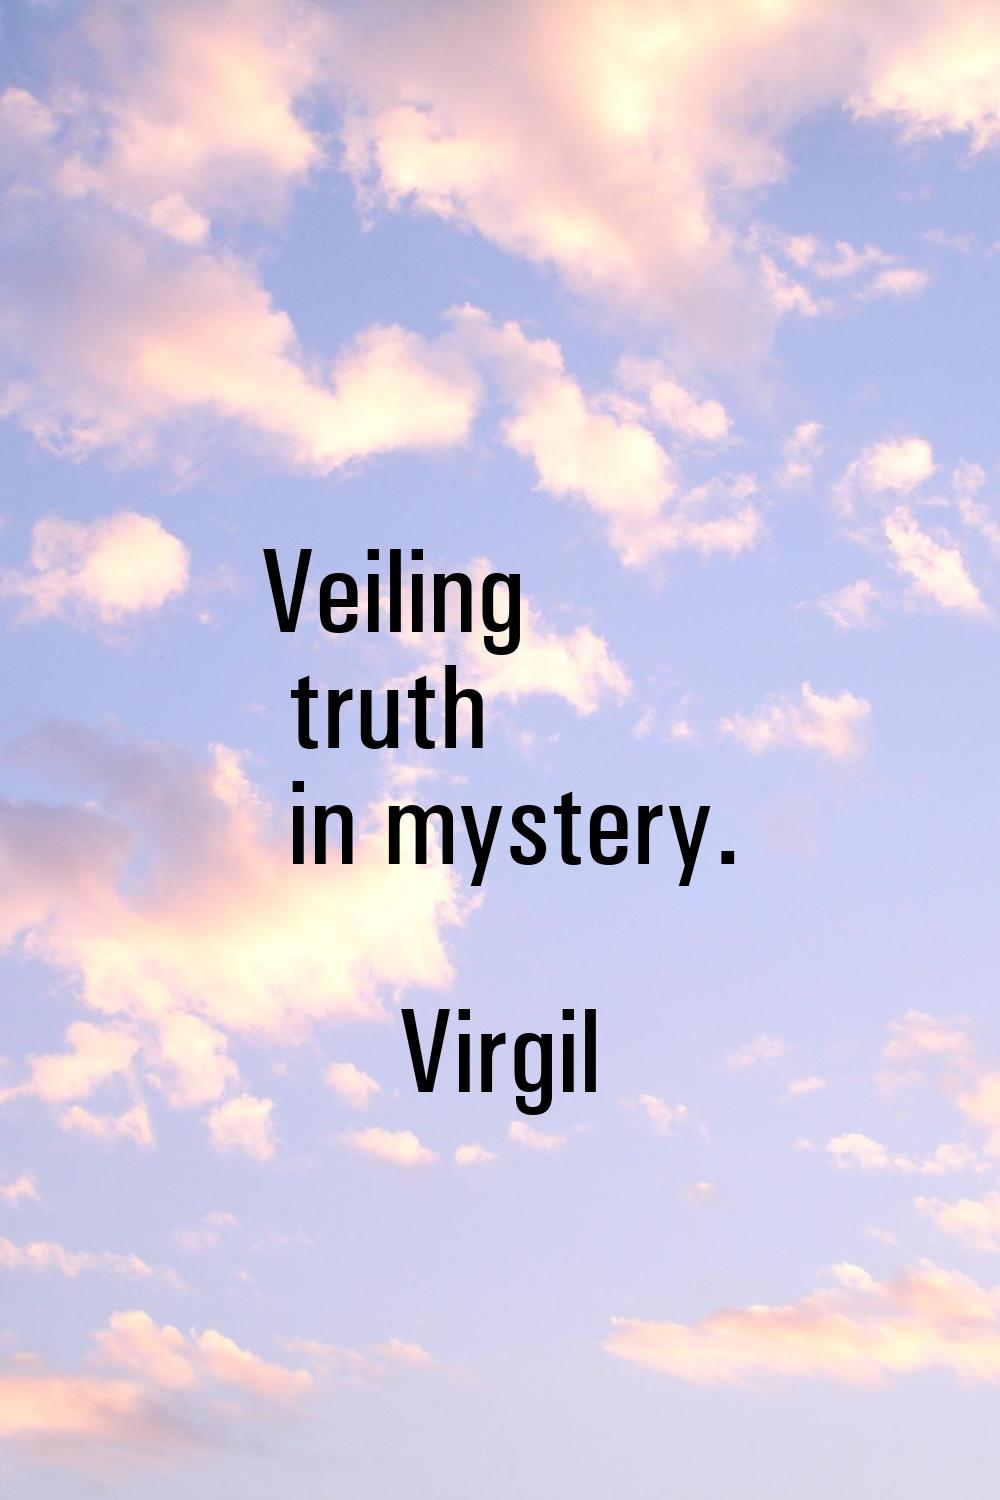 Veiling truth in mystery.